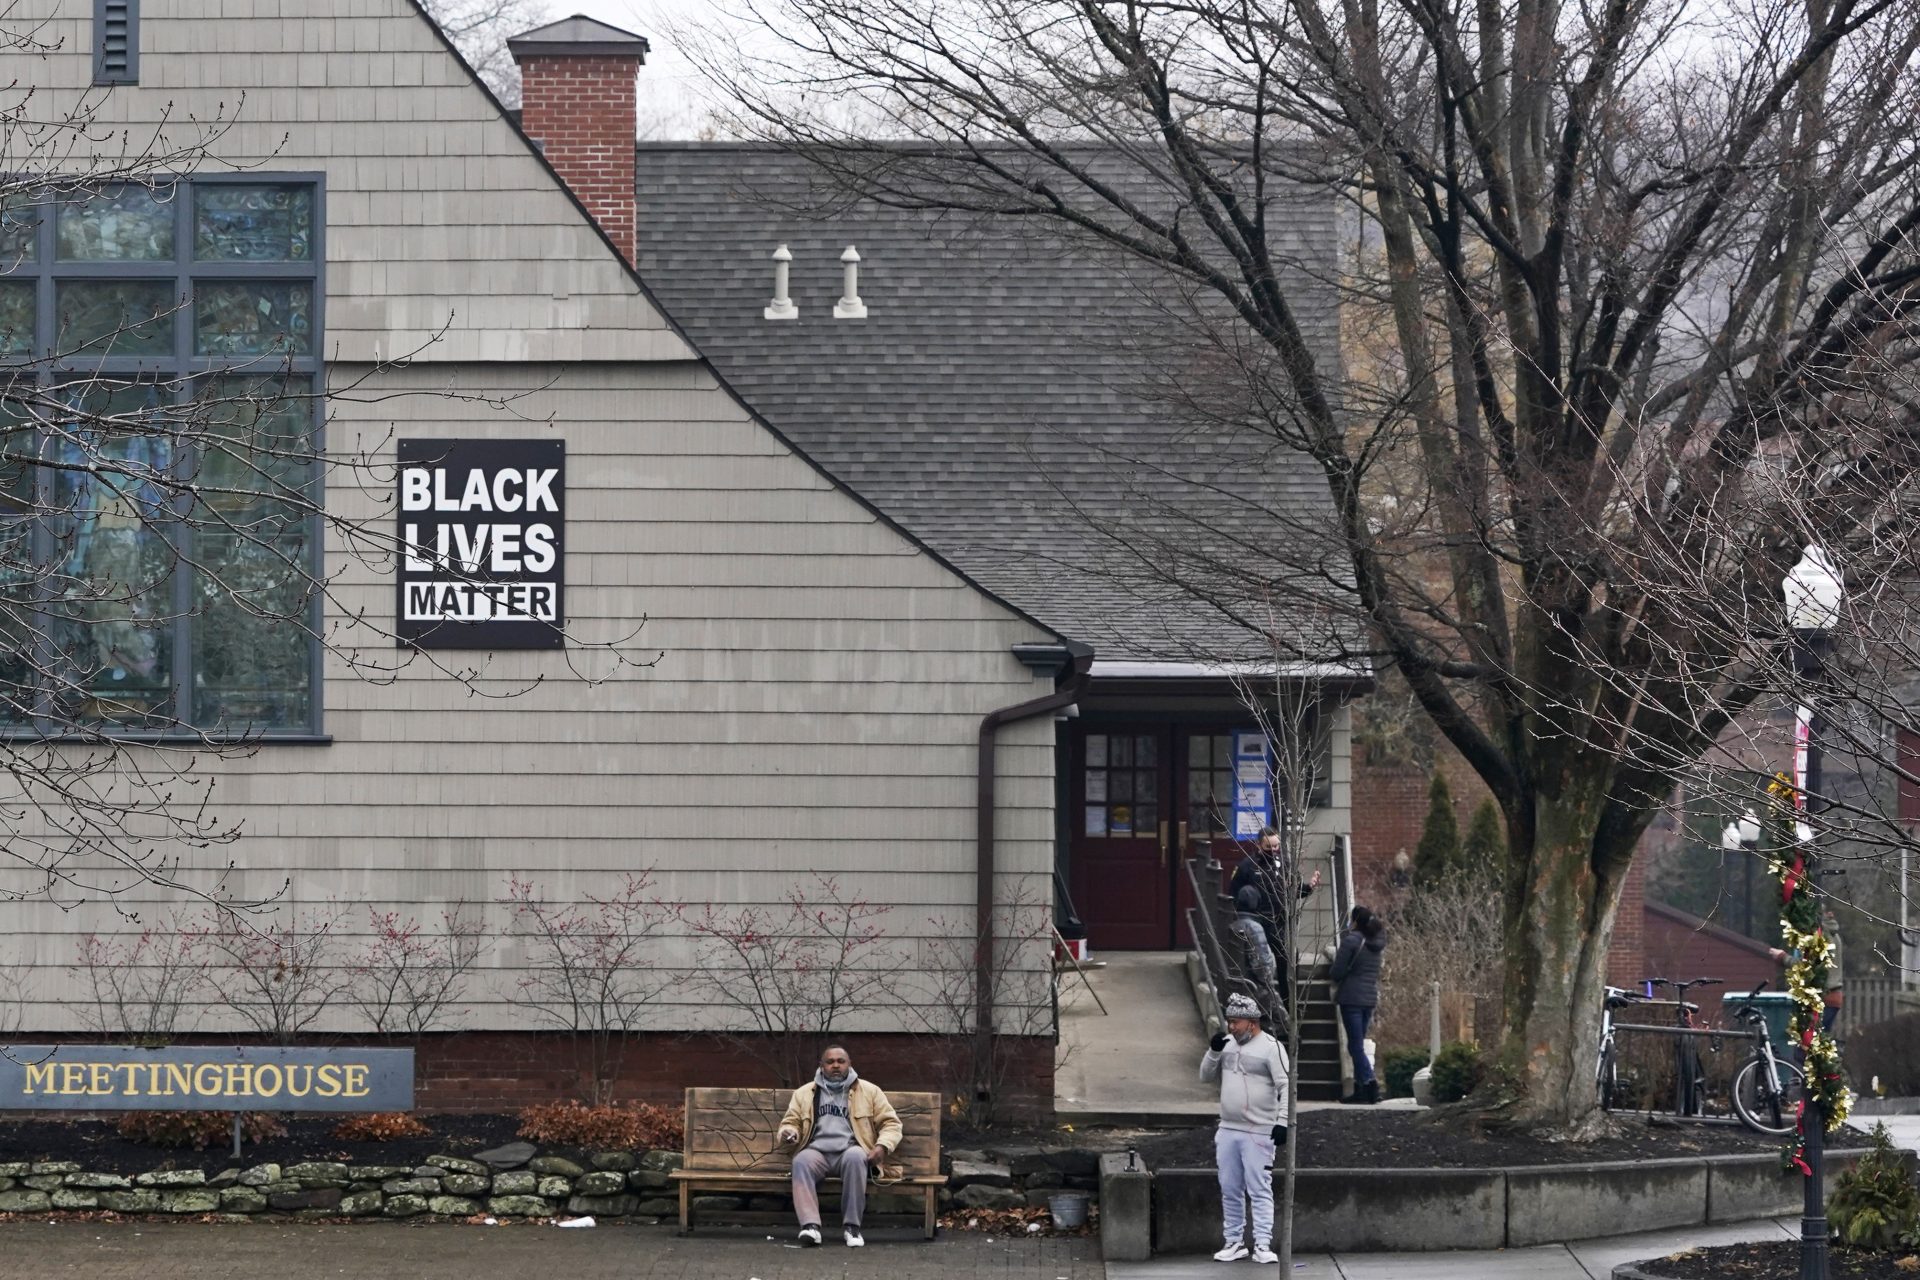 A "Black Lives Matter" sign hangs from the Universalist Meetinghouse, Friday, Jan. 15, 2021, in Amherst, Mass.